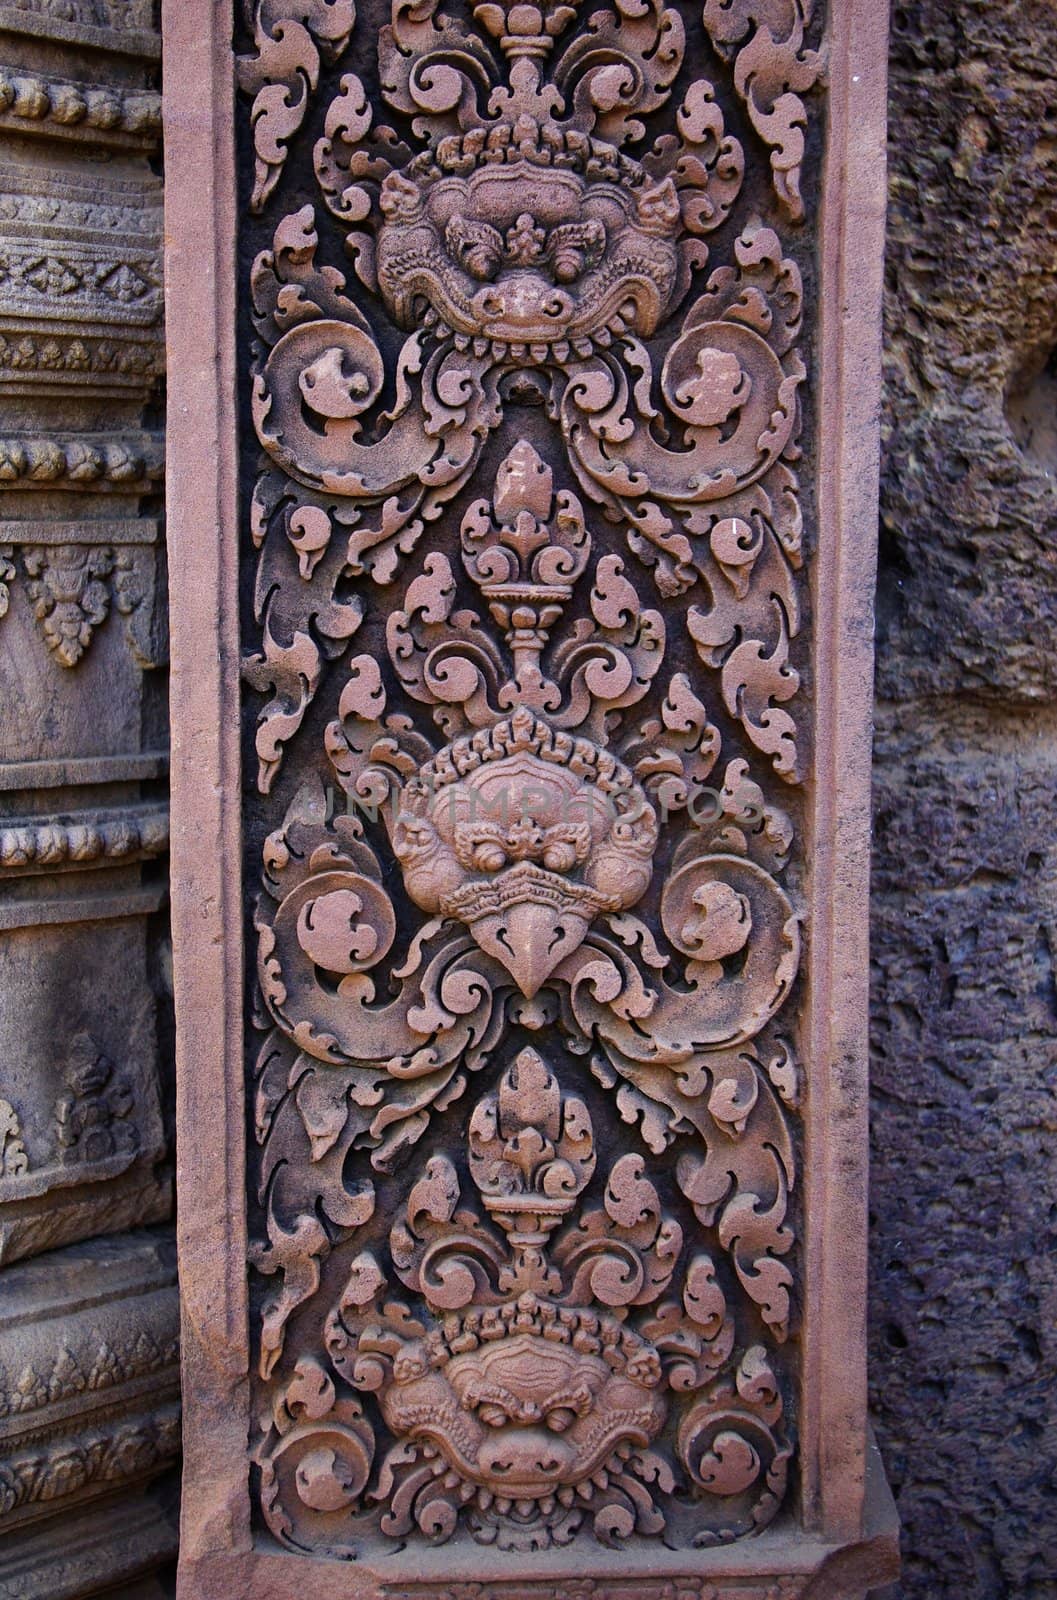 It's a close-up on an engraved red stone of the Prasat Kravan temple in Angkor